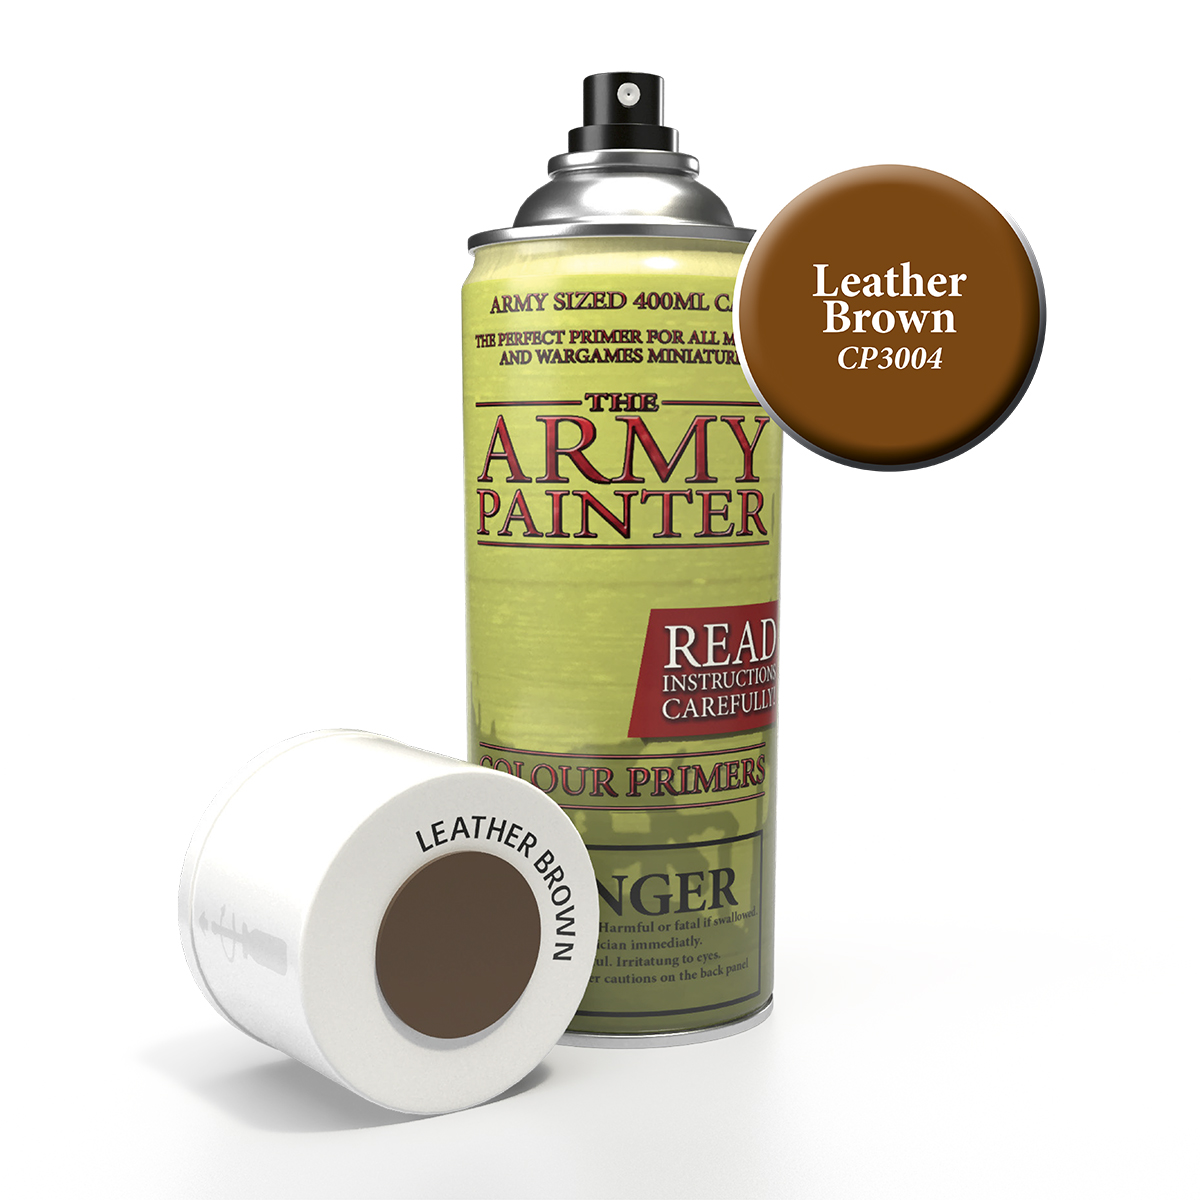 ArmyPainter Colorspray Leather Brown